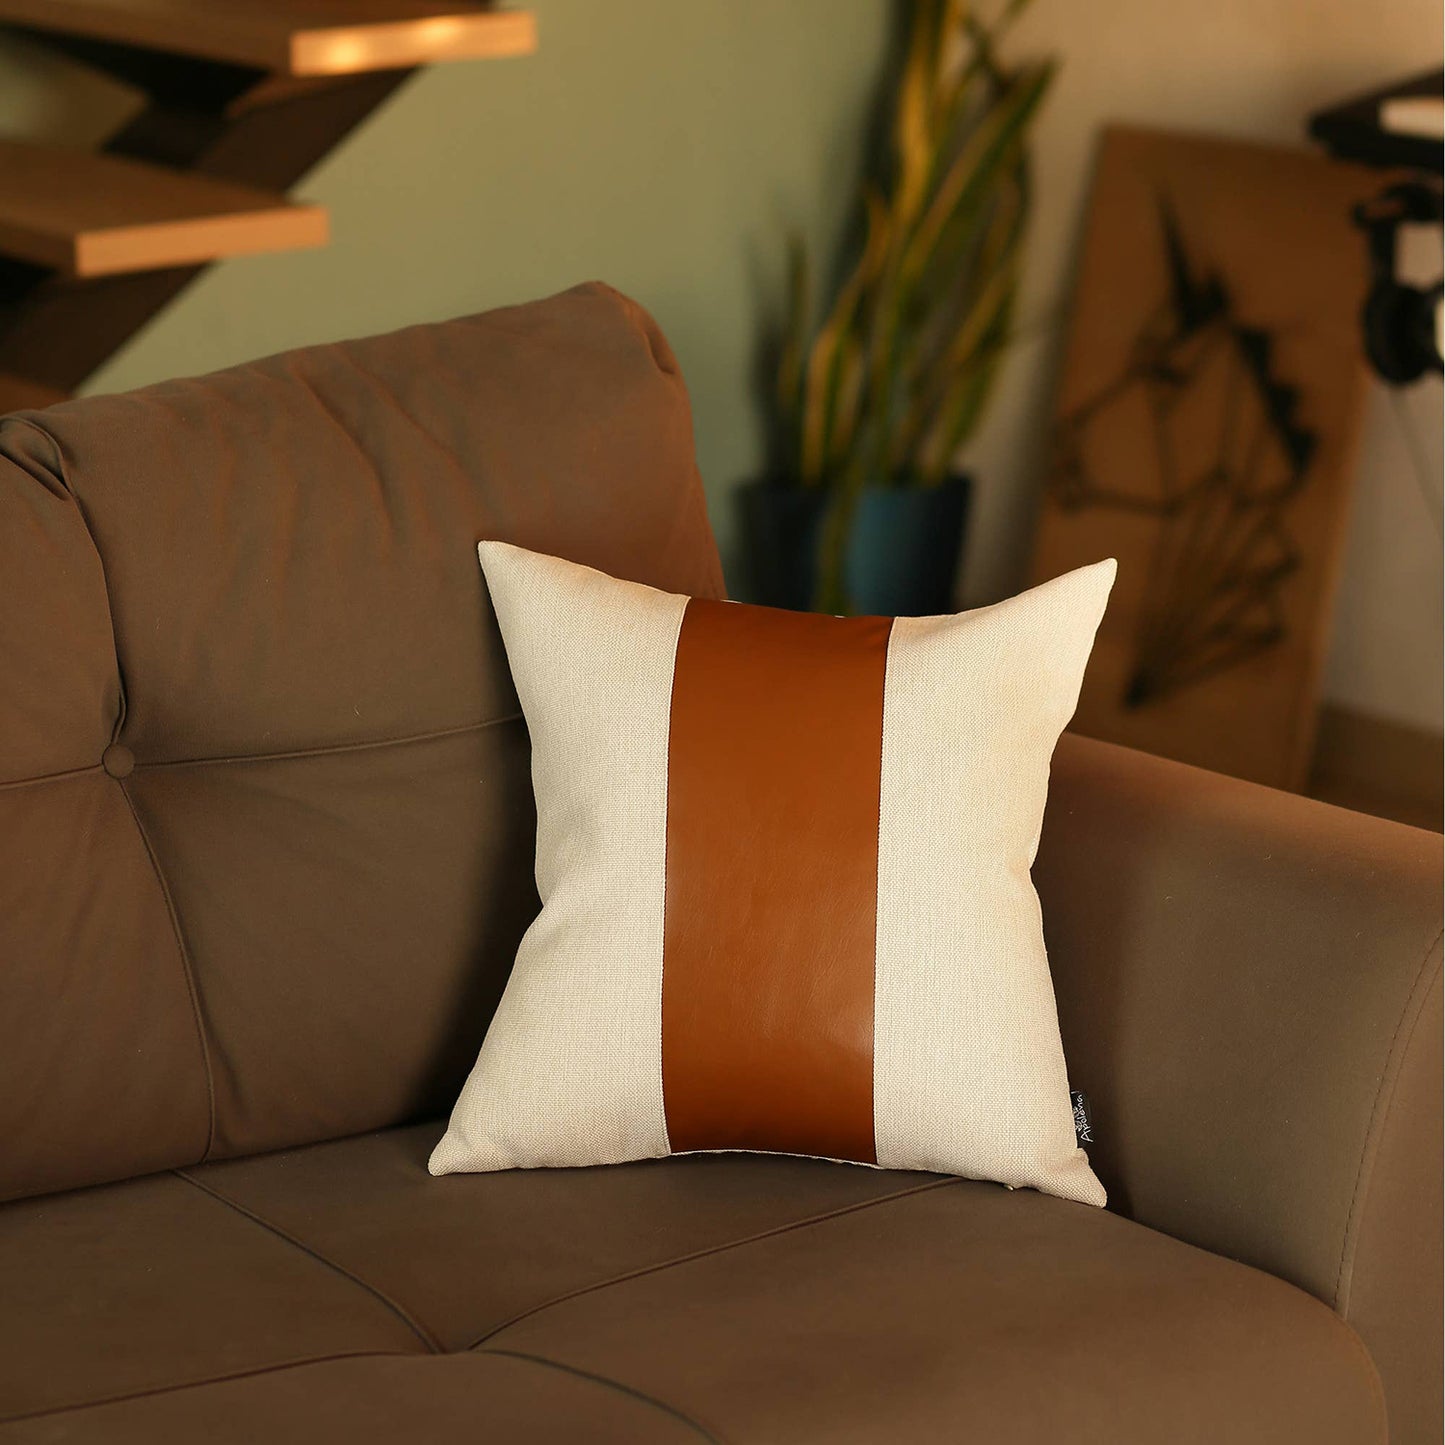 Boho Throw Pillow Brown Mixed Design Set of 4 Vegan Faux Leather Solid for Couch, Bedding